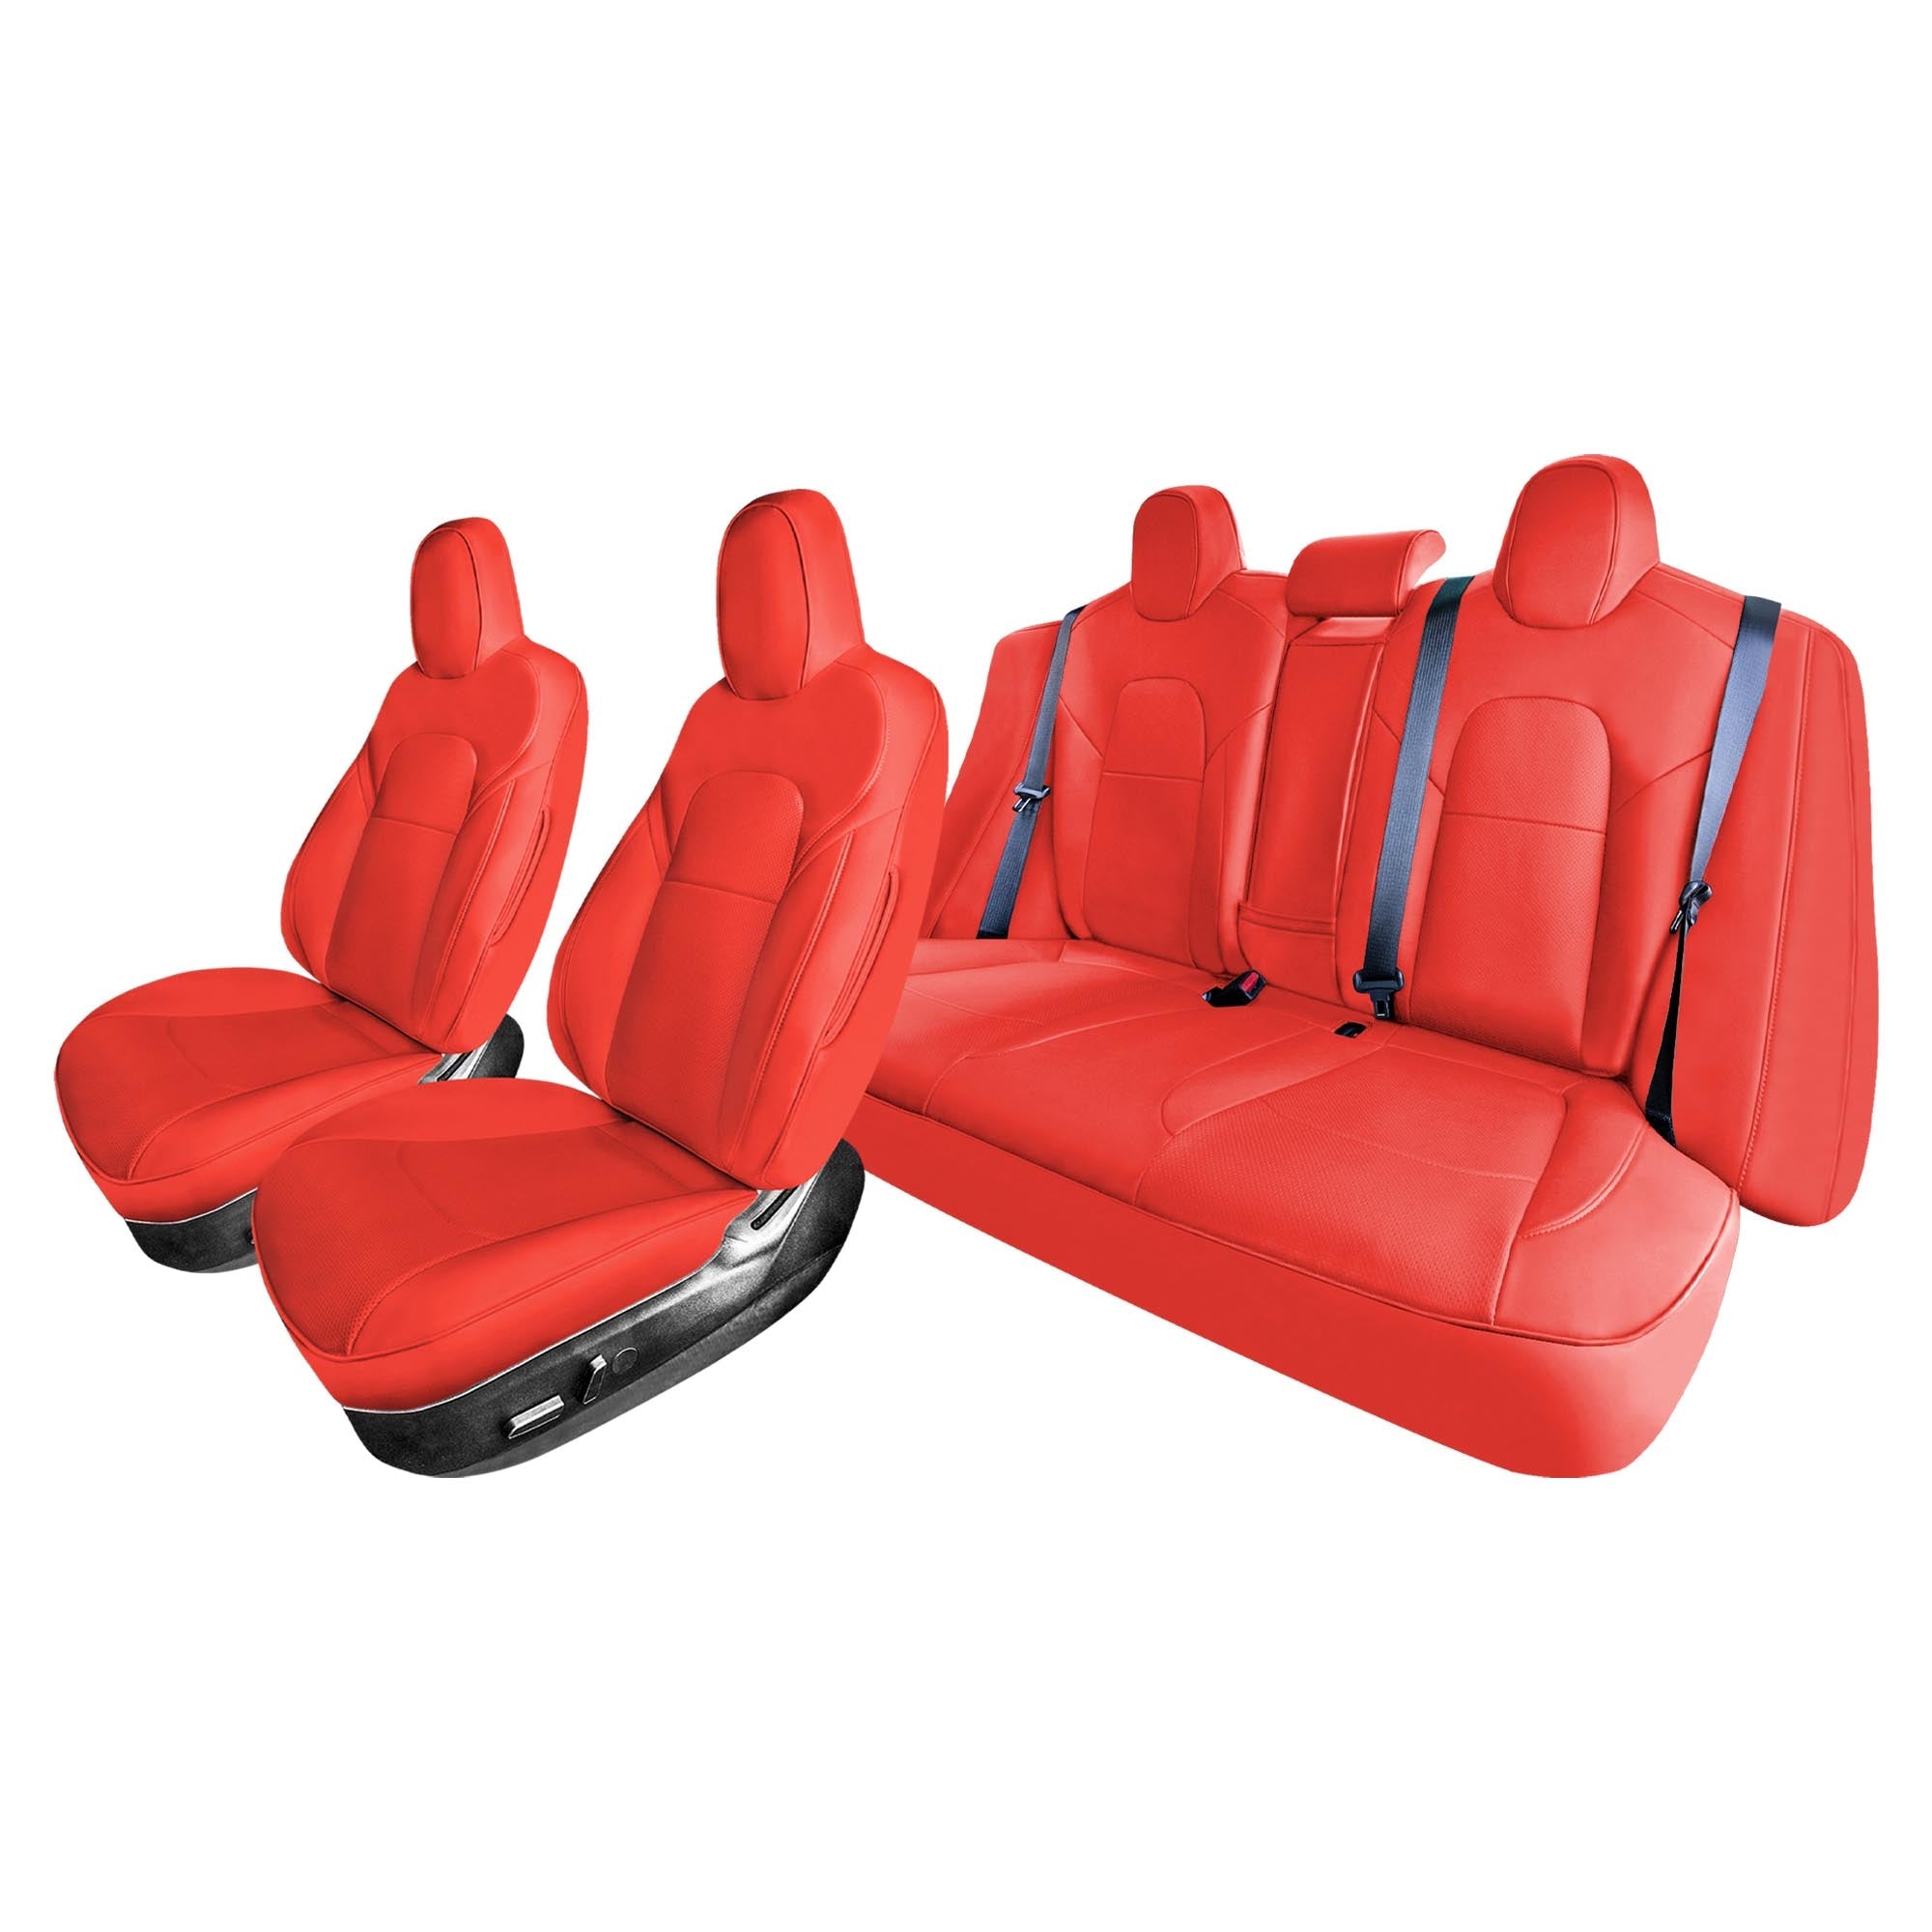 FH Group Neoprene Custom Fit Seat Covers for 2020-2024 Toyota Highlander  Red - Full Set DMCM5028RED-FU - The Home Depot